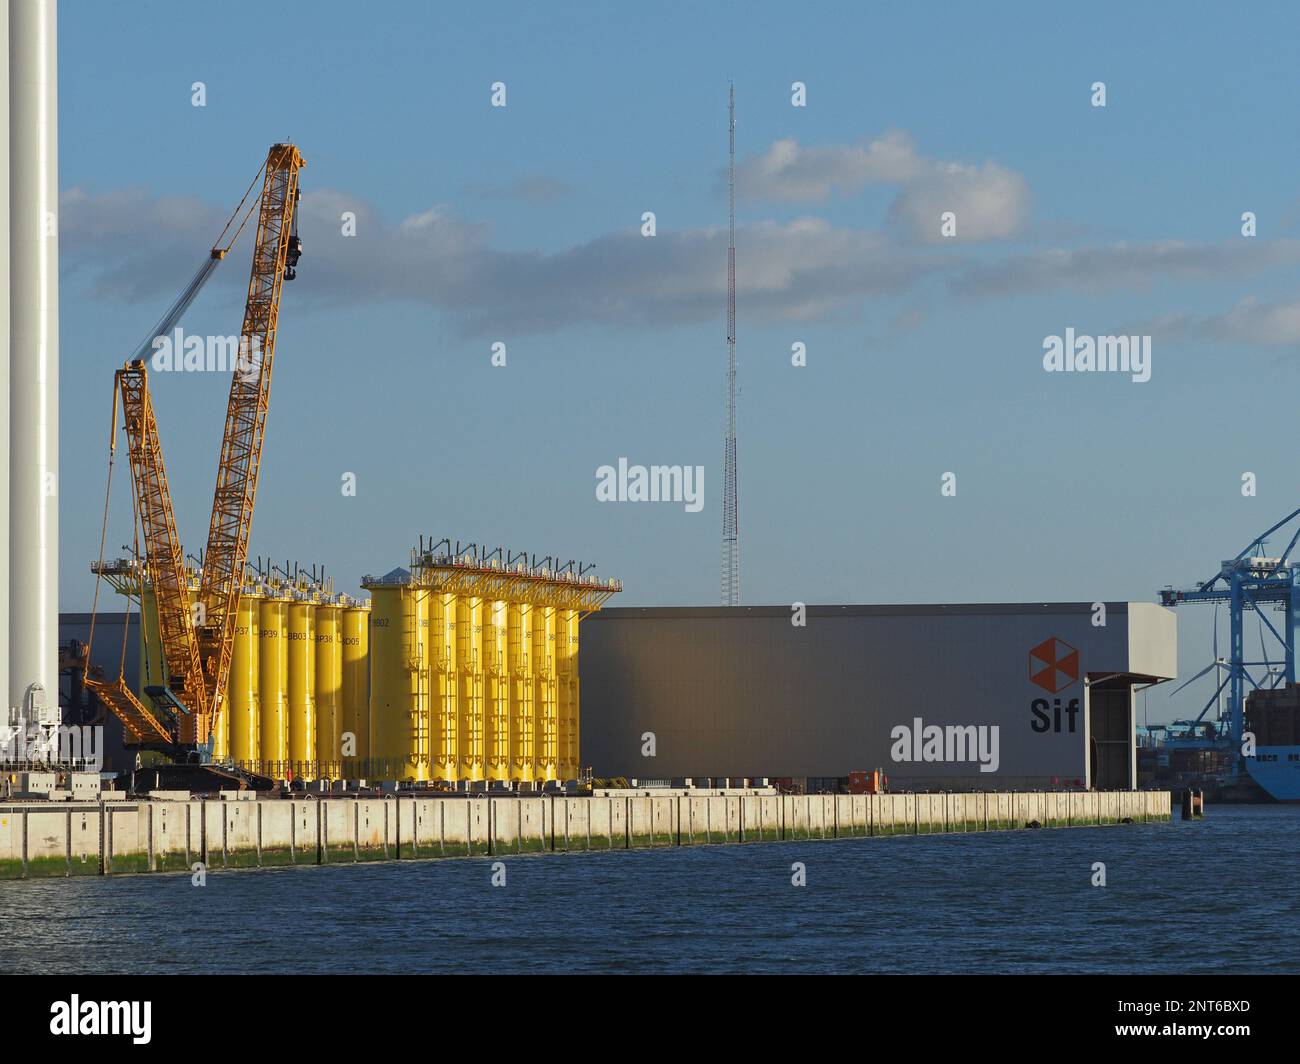 SIF factory which makes parts for windfarms at sea, which are enormous in size. The yellow parts are windmill foundation parts. Maasvlakte 2, Port of Stock Photo